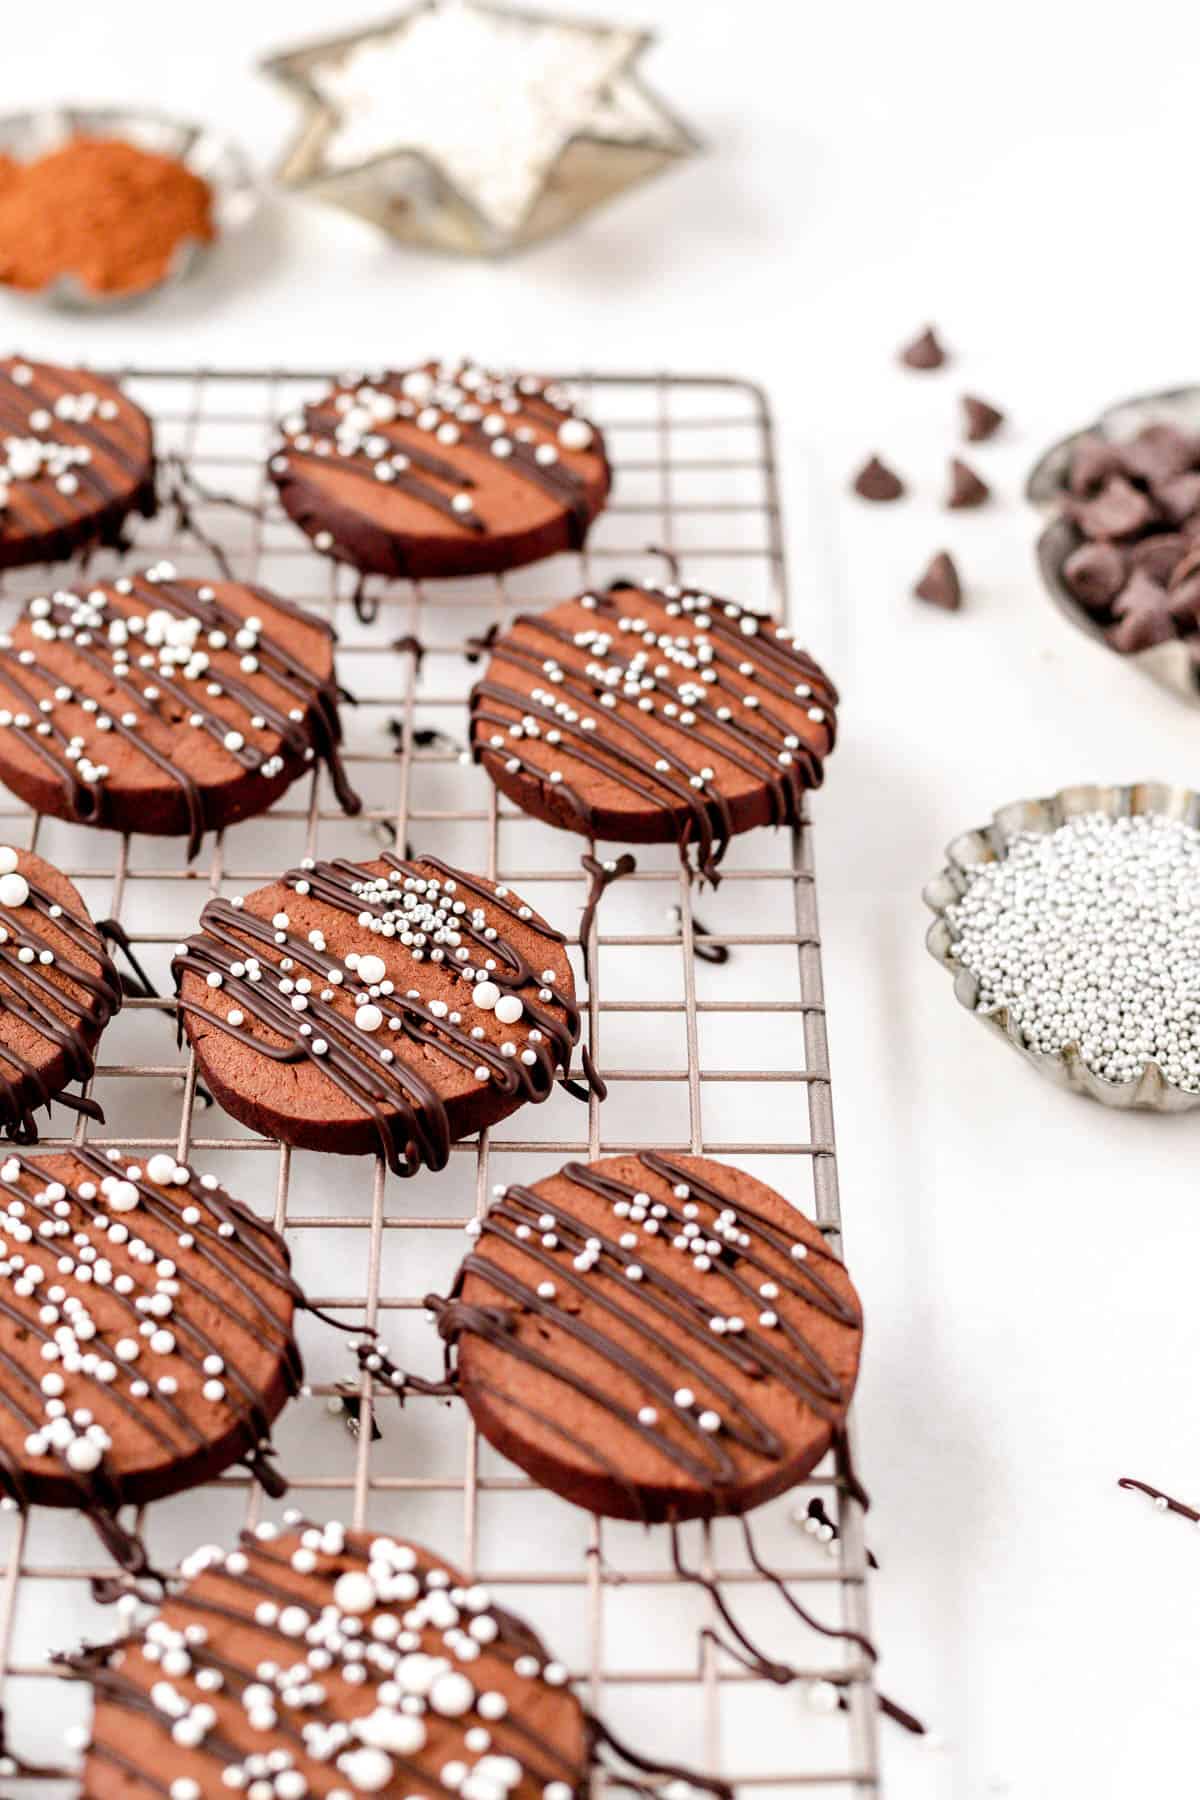 Decorated chocolate butter cookies on a cooling rack with tins of sprinkles, chocolate chips, and cocoa.